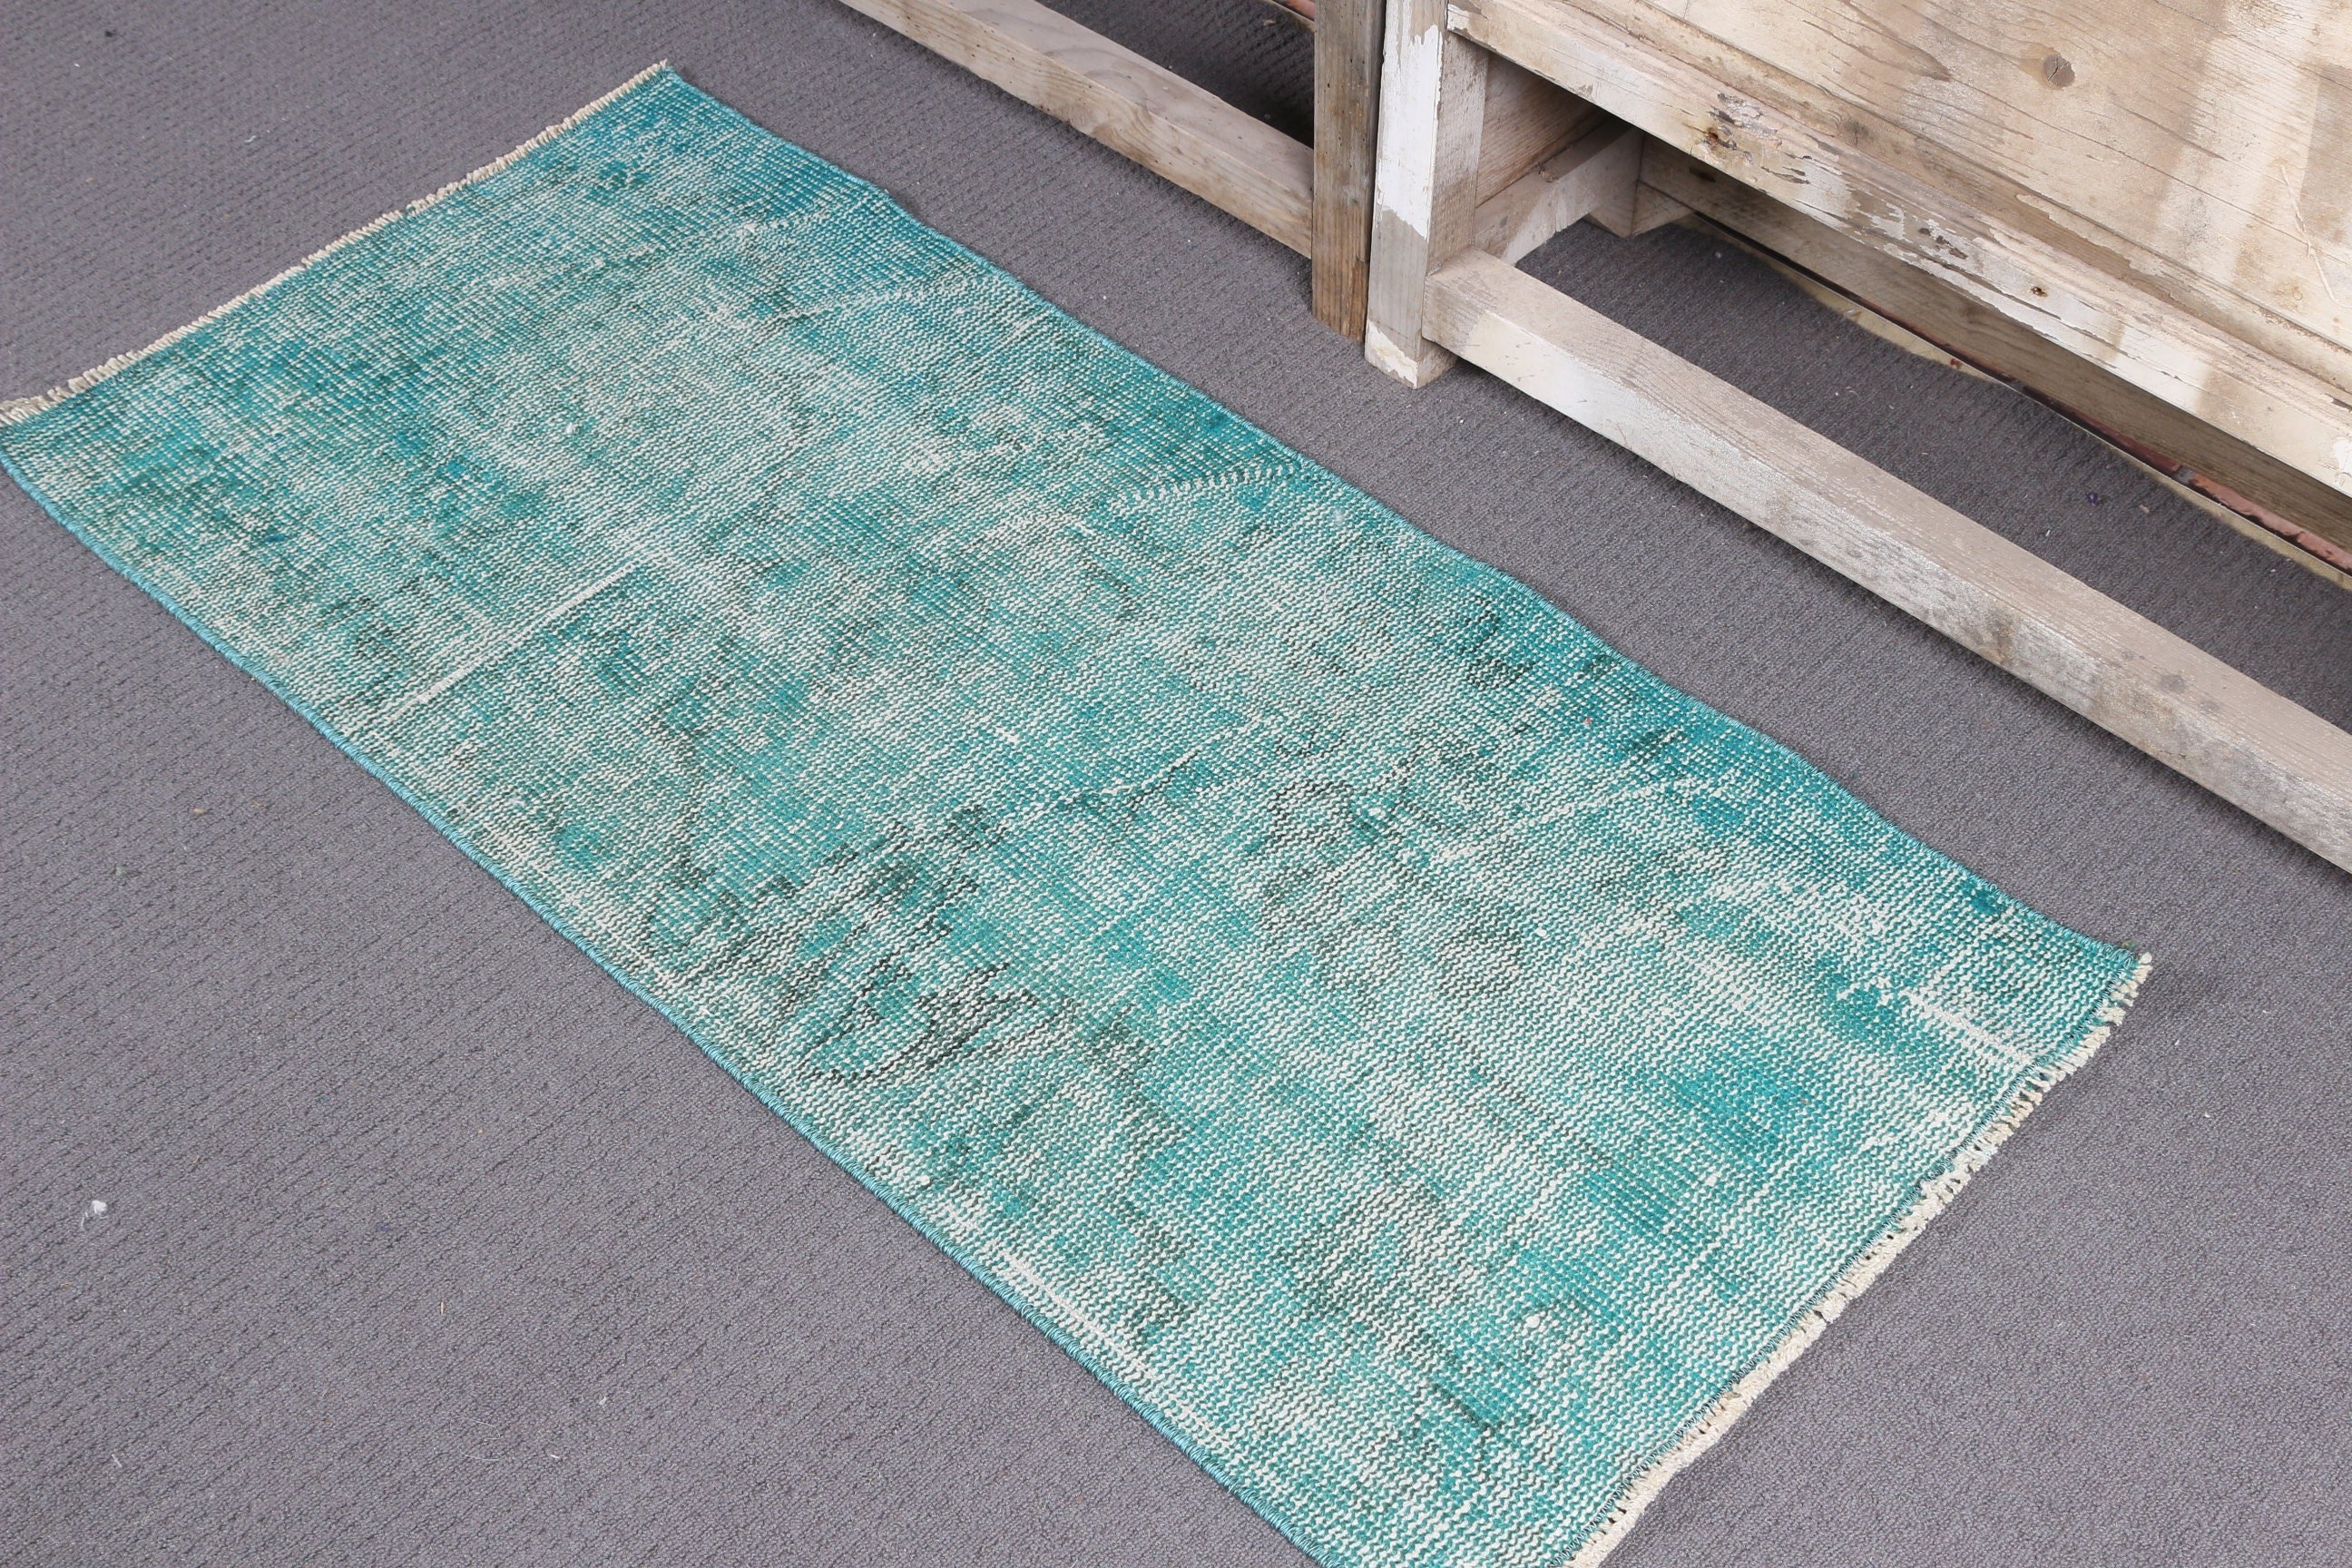 Turkish Rugs, Rugs for Entry, Vintage Rug, Antique Rug, Kitchen Rug, Green  1.8x3.8 ft Small Rug, Entry Rug, Wool Rug